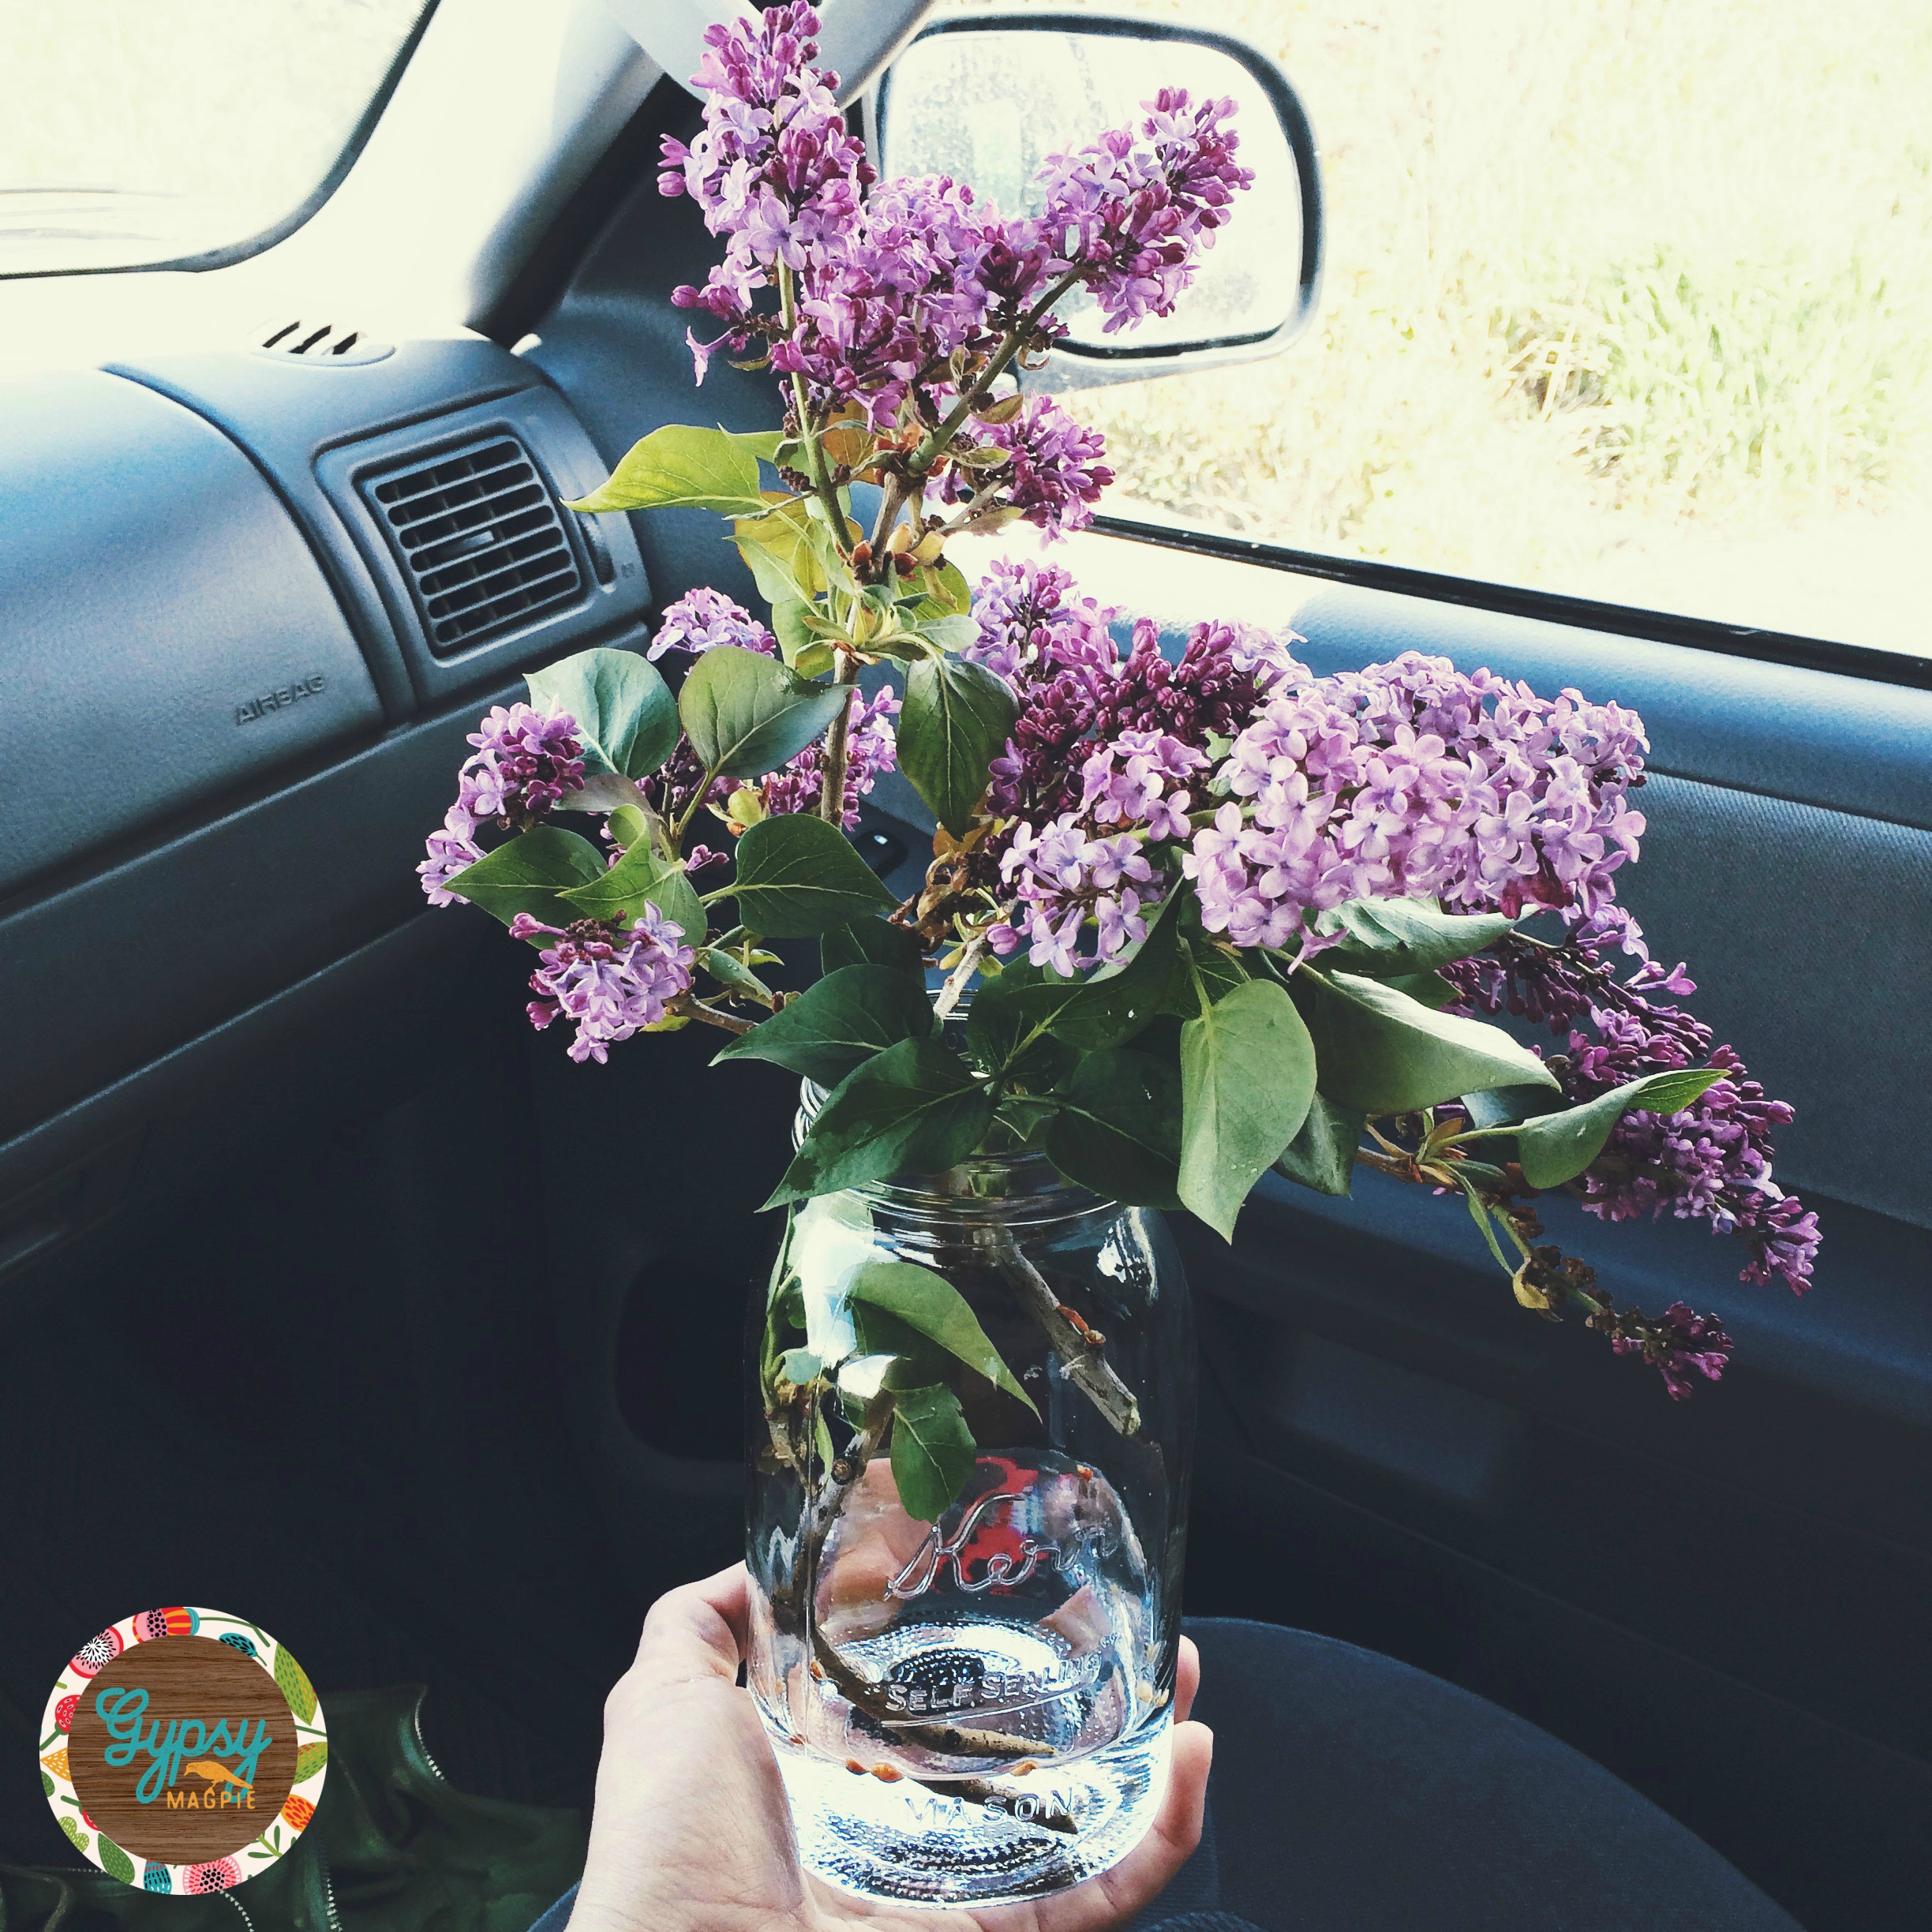 Summer Intentions of a Truck Wife {Gypsy Magpie}